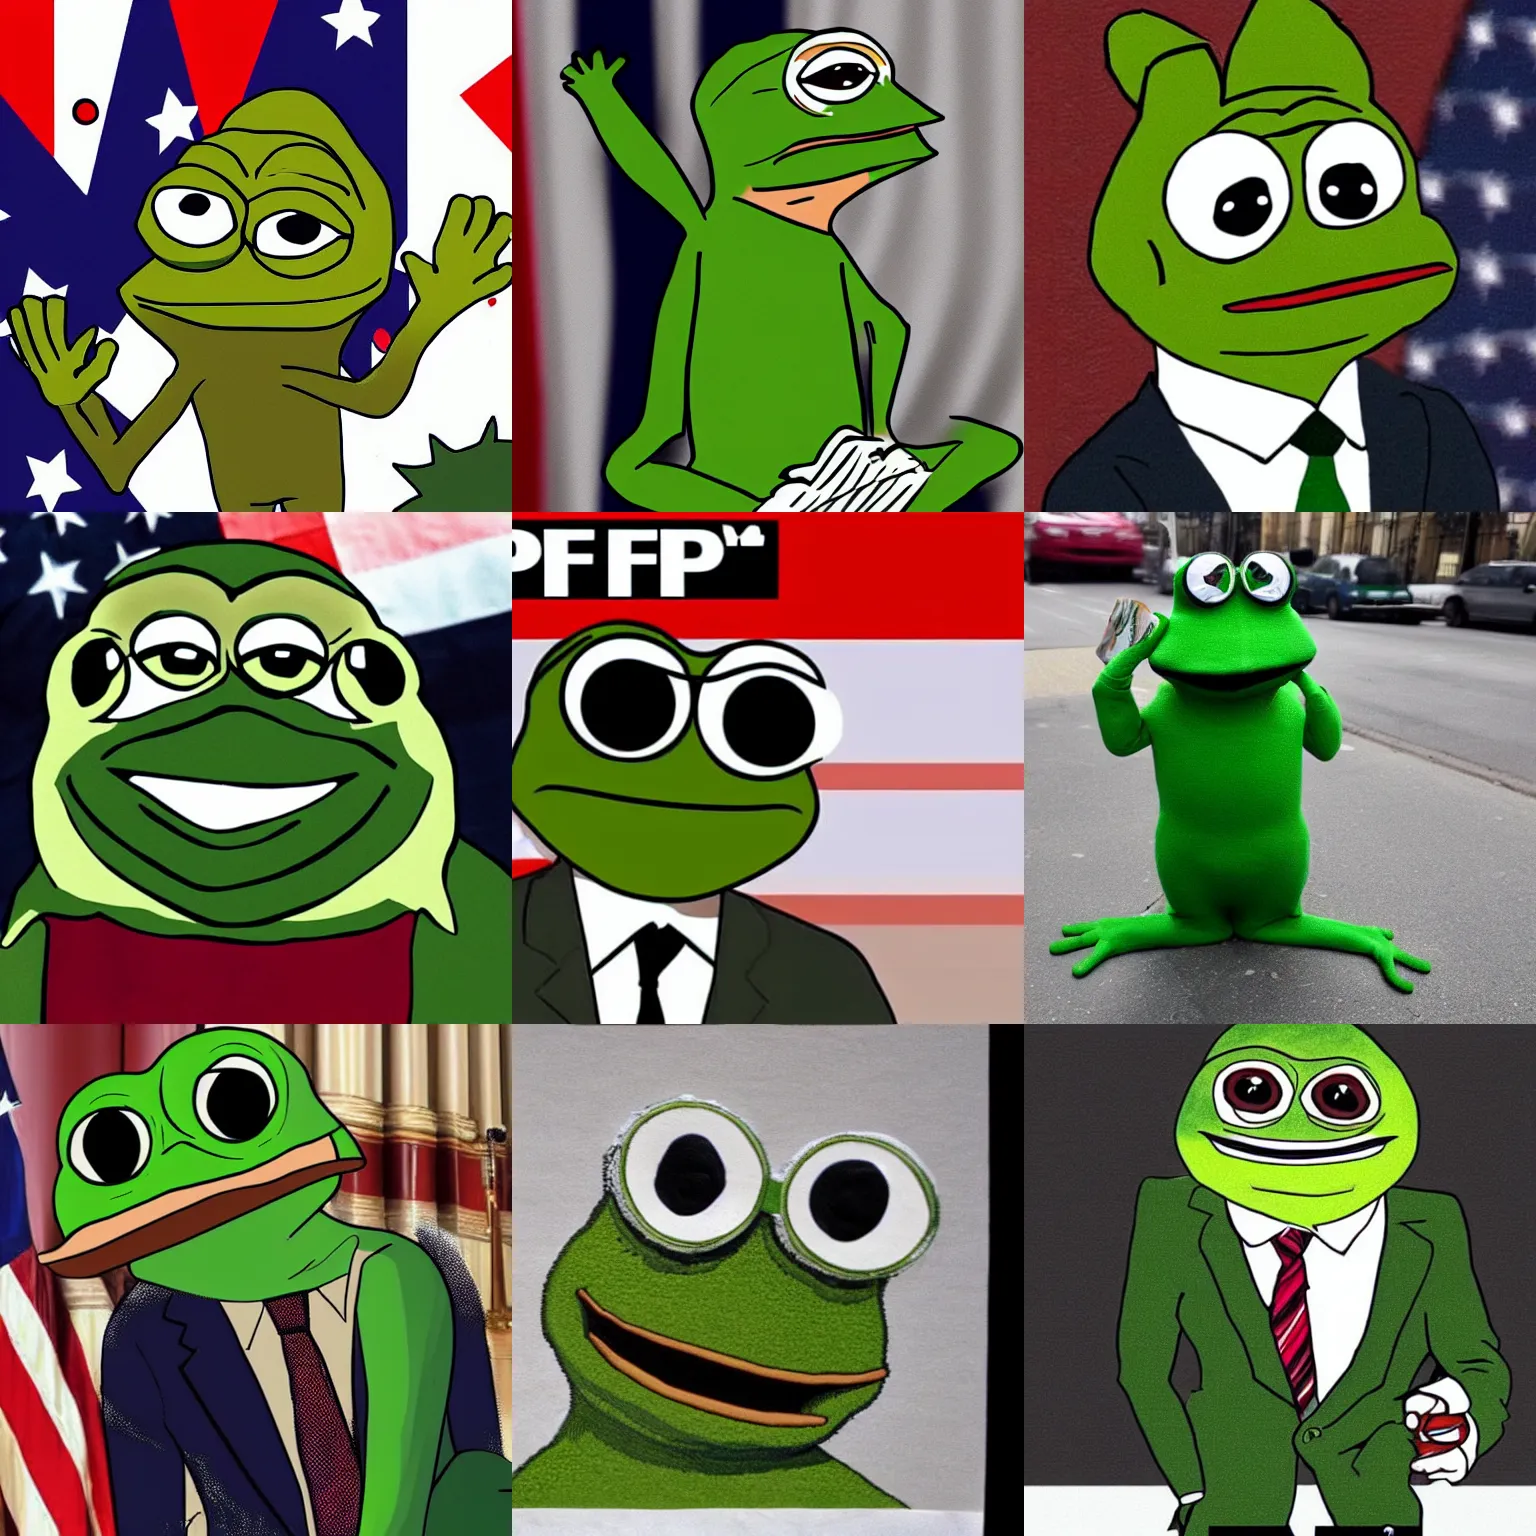 Pepe the Frog, dressed like Barack Obama, acting as | Stable Diffusion ...